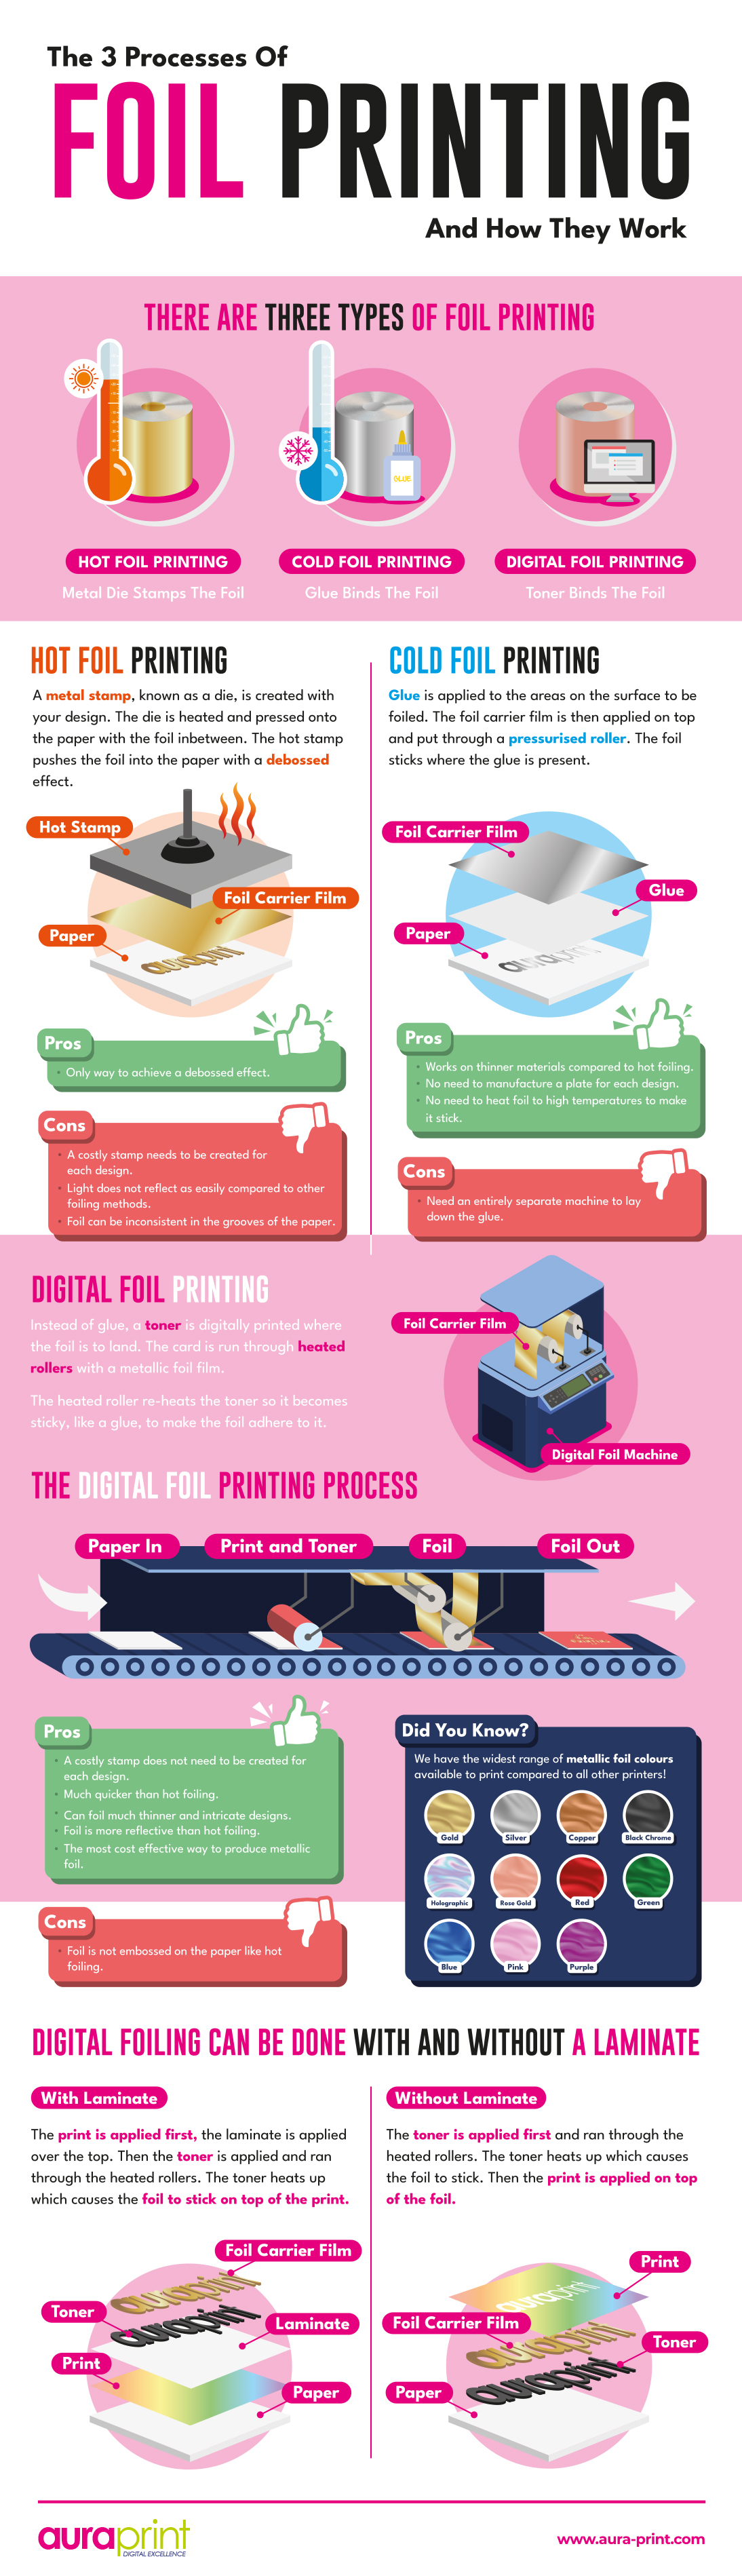 Foil Printing Infographic